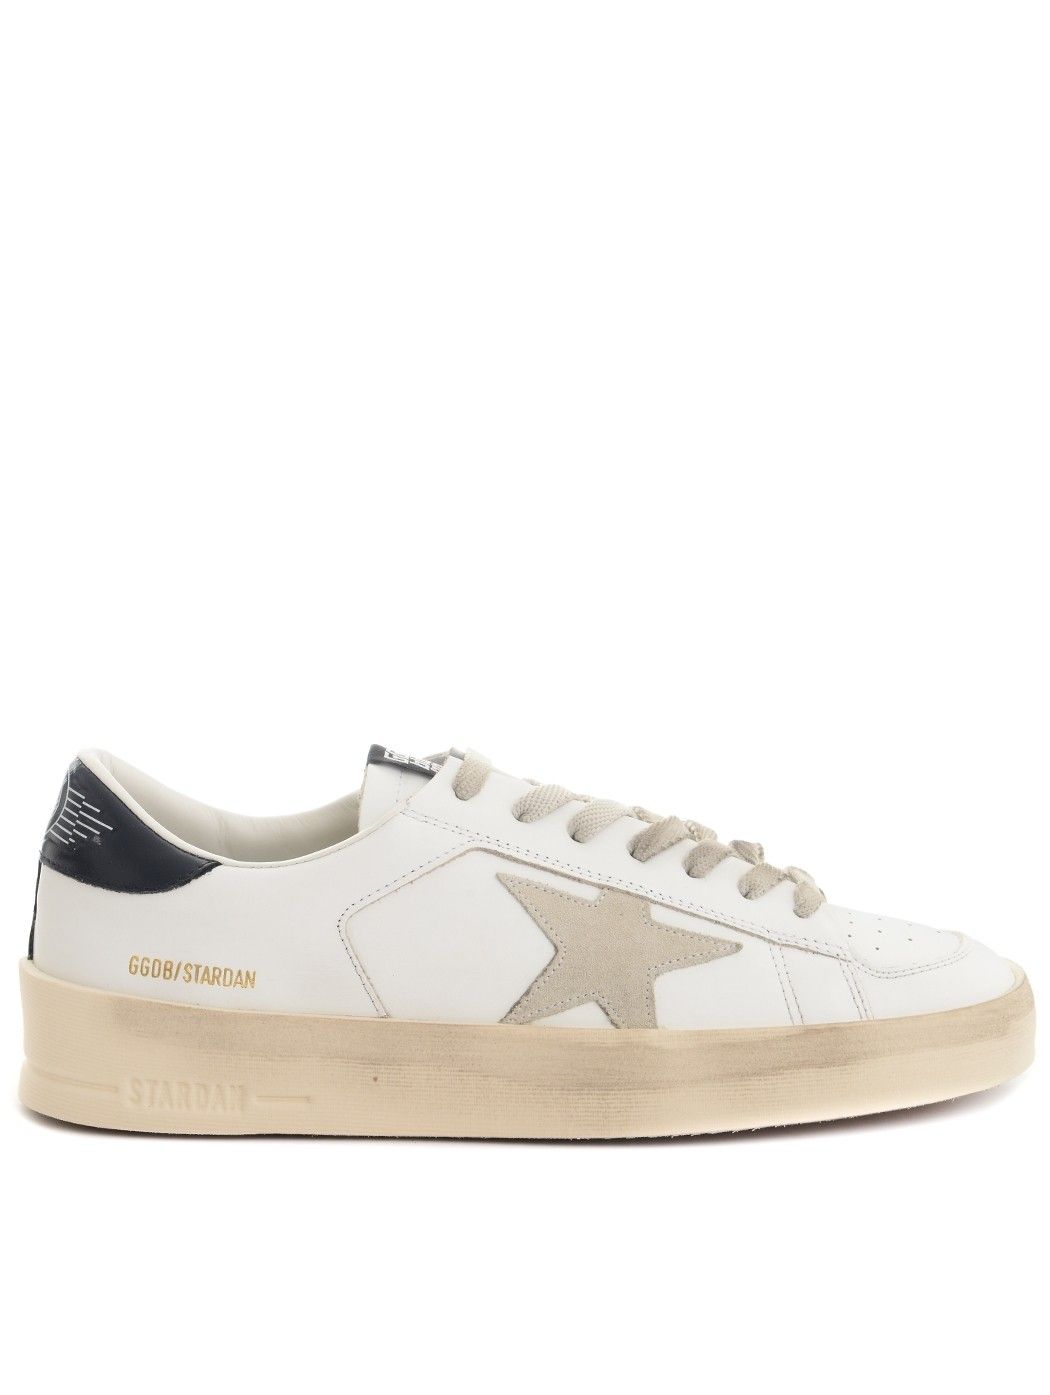  MAN SHOES,CHURCH'S SHOES,CHURCH'S LOAFER SHOES,GOLDEN GOOSE SNEAKERS,GOLDEN GOOSE SHOES,DIADORA HERITAGE SNEAKERS  GOLDEN GOOSE GMF00128-F000567